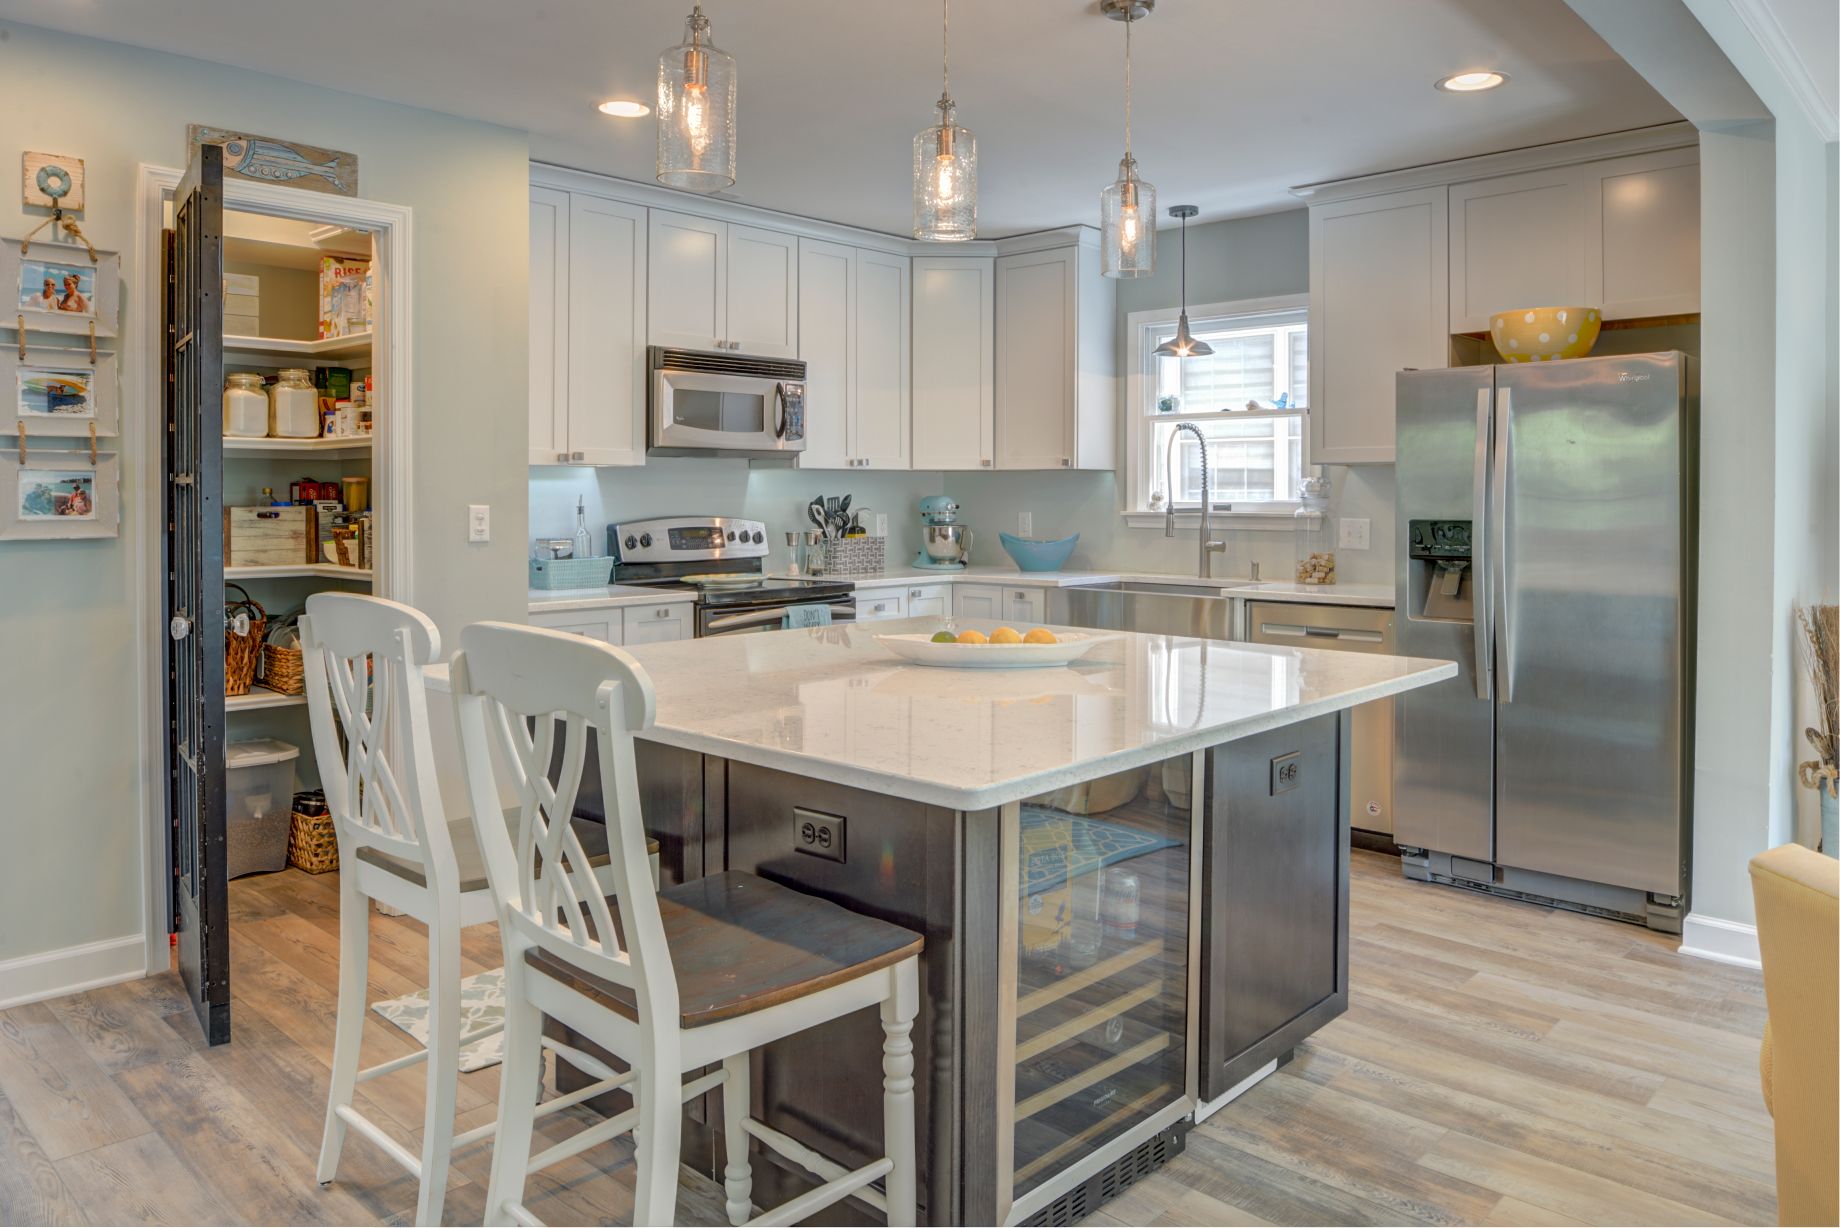 Kitchen Remodel in Canal Drive, Millsboro DE with Center Island